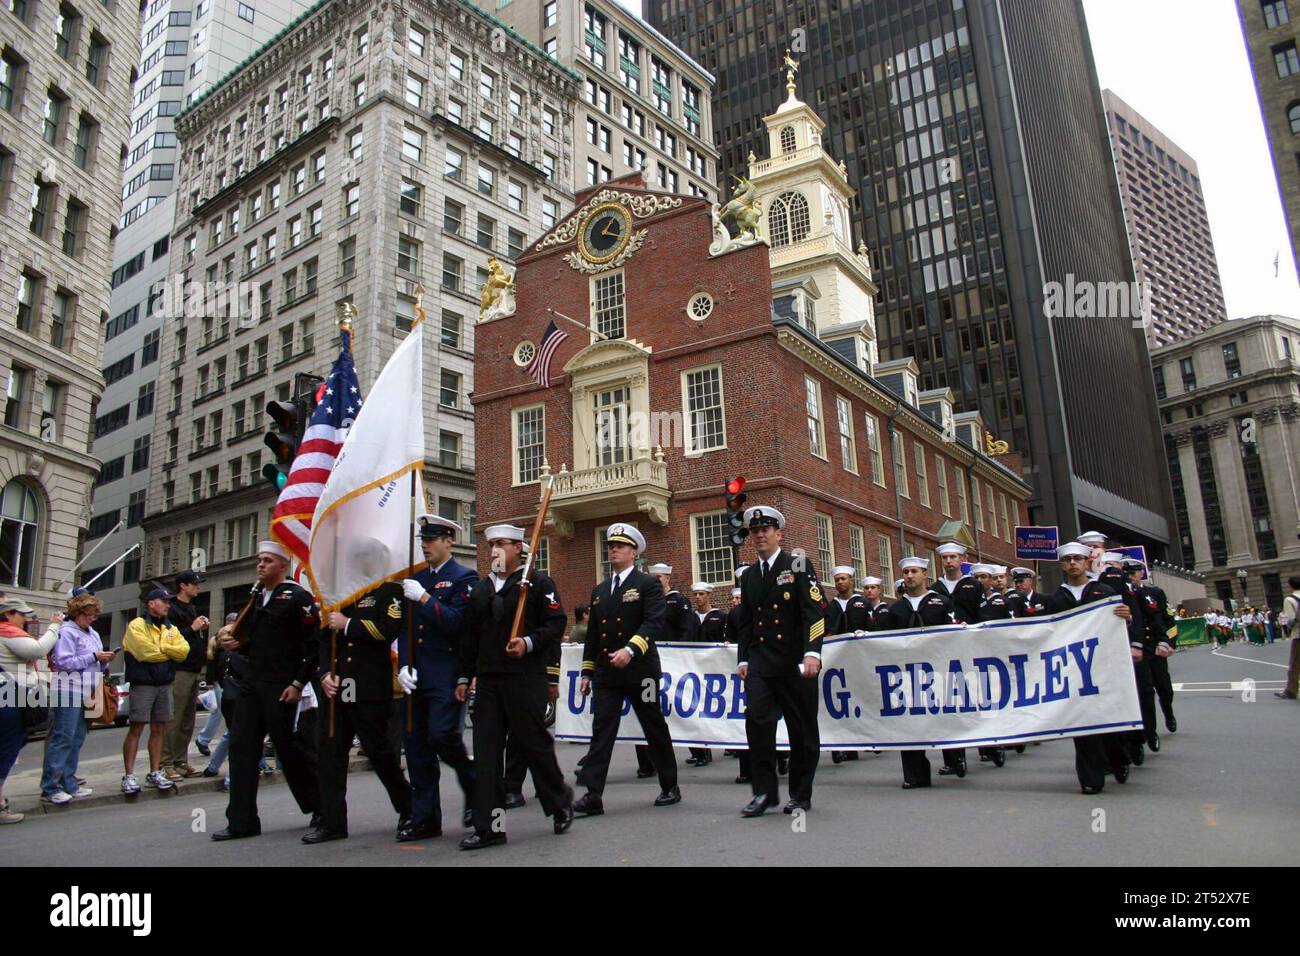 0710078110K-003  BOSTON, Mass. (Oct. 7, 2007) Р Crew members of the guided-missile frigate USS Bradley (FFG 49) pass the Old State House in downtown Boston during the annual Columbus Day Parade. The Bradley is in Boston for a four-day port visit. The parade was just one of several planned events for the Sailors during their holiday visit including a community service project at the New England Shelter for Homeless Veterans and the presentation of colors at the New England Patriots game. U.S. Navy Stock Photo